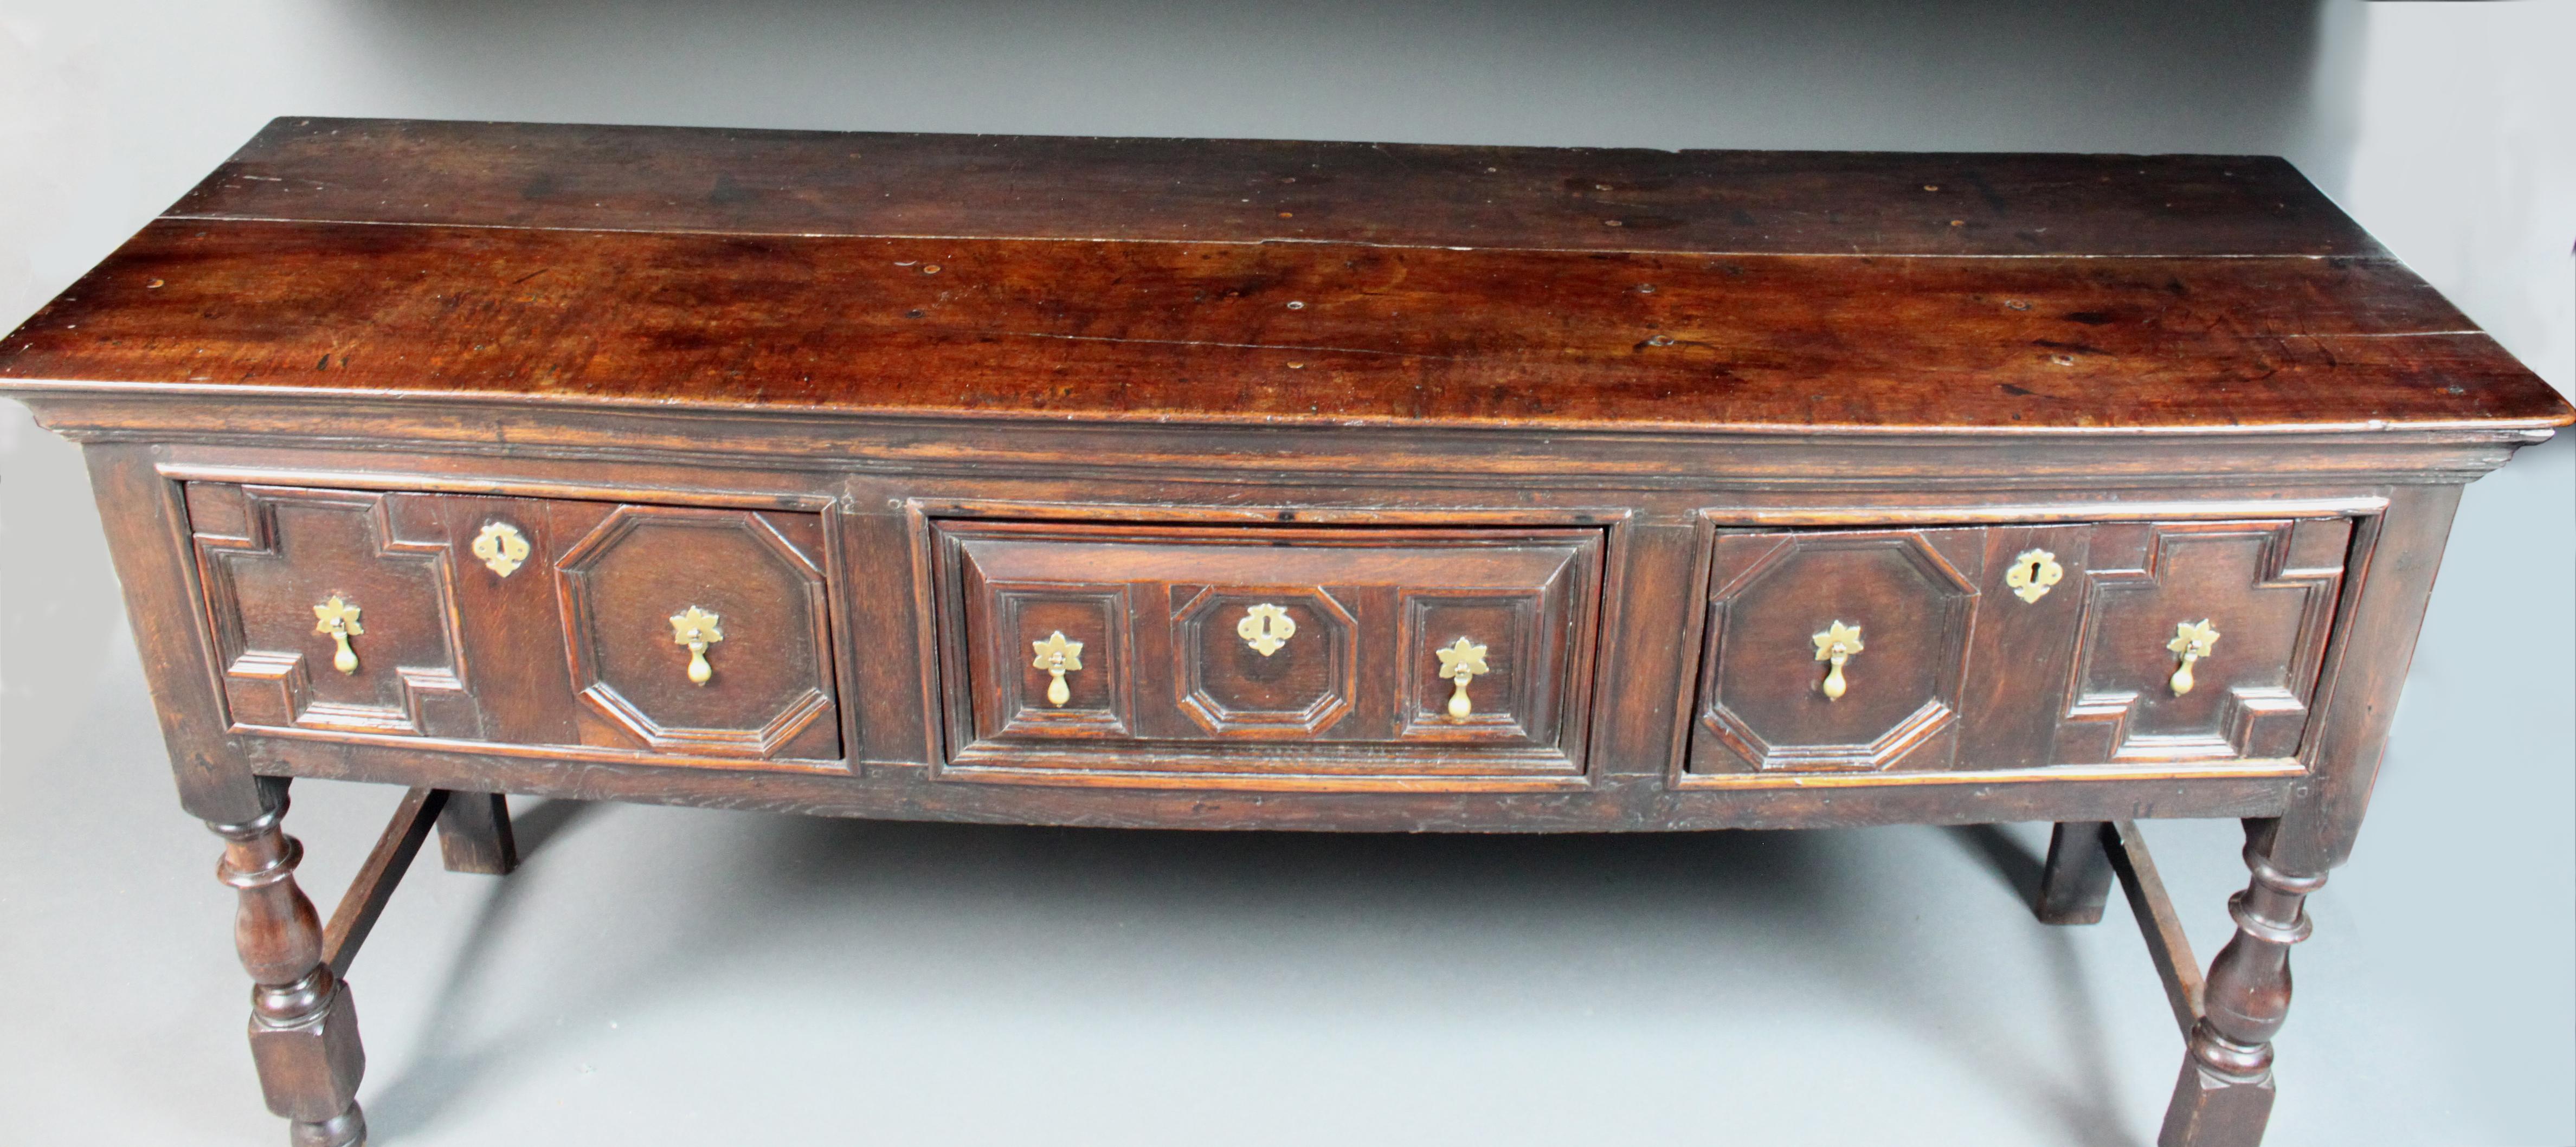 Charles II 17th Century Oak Serving Dresser with Geometric Moulding on the Drawers